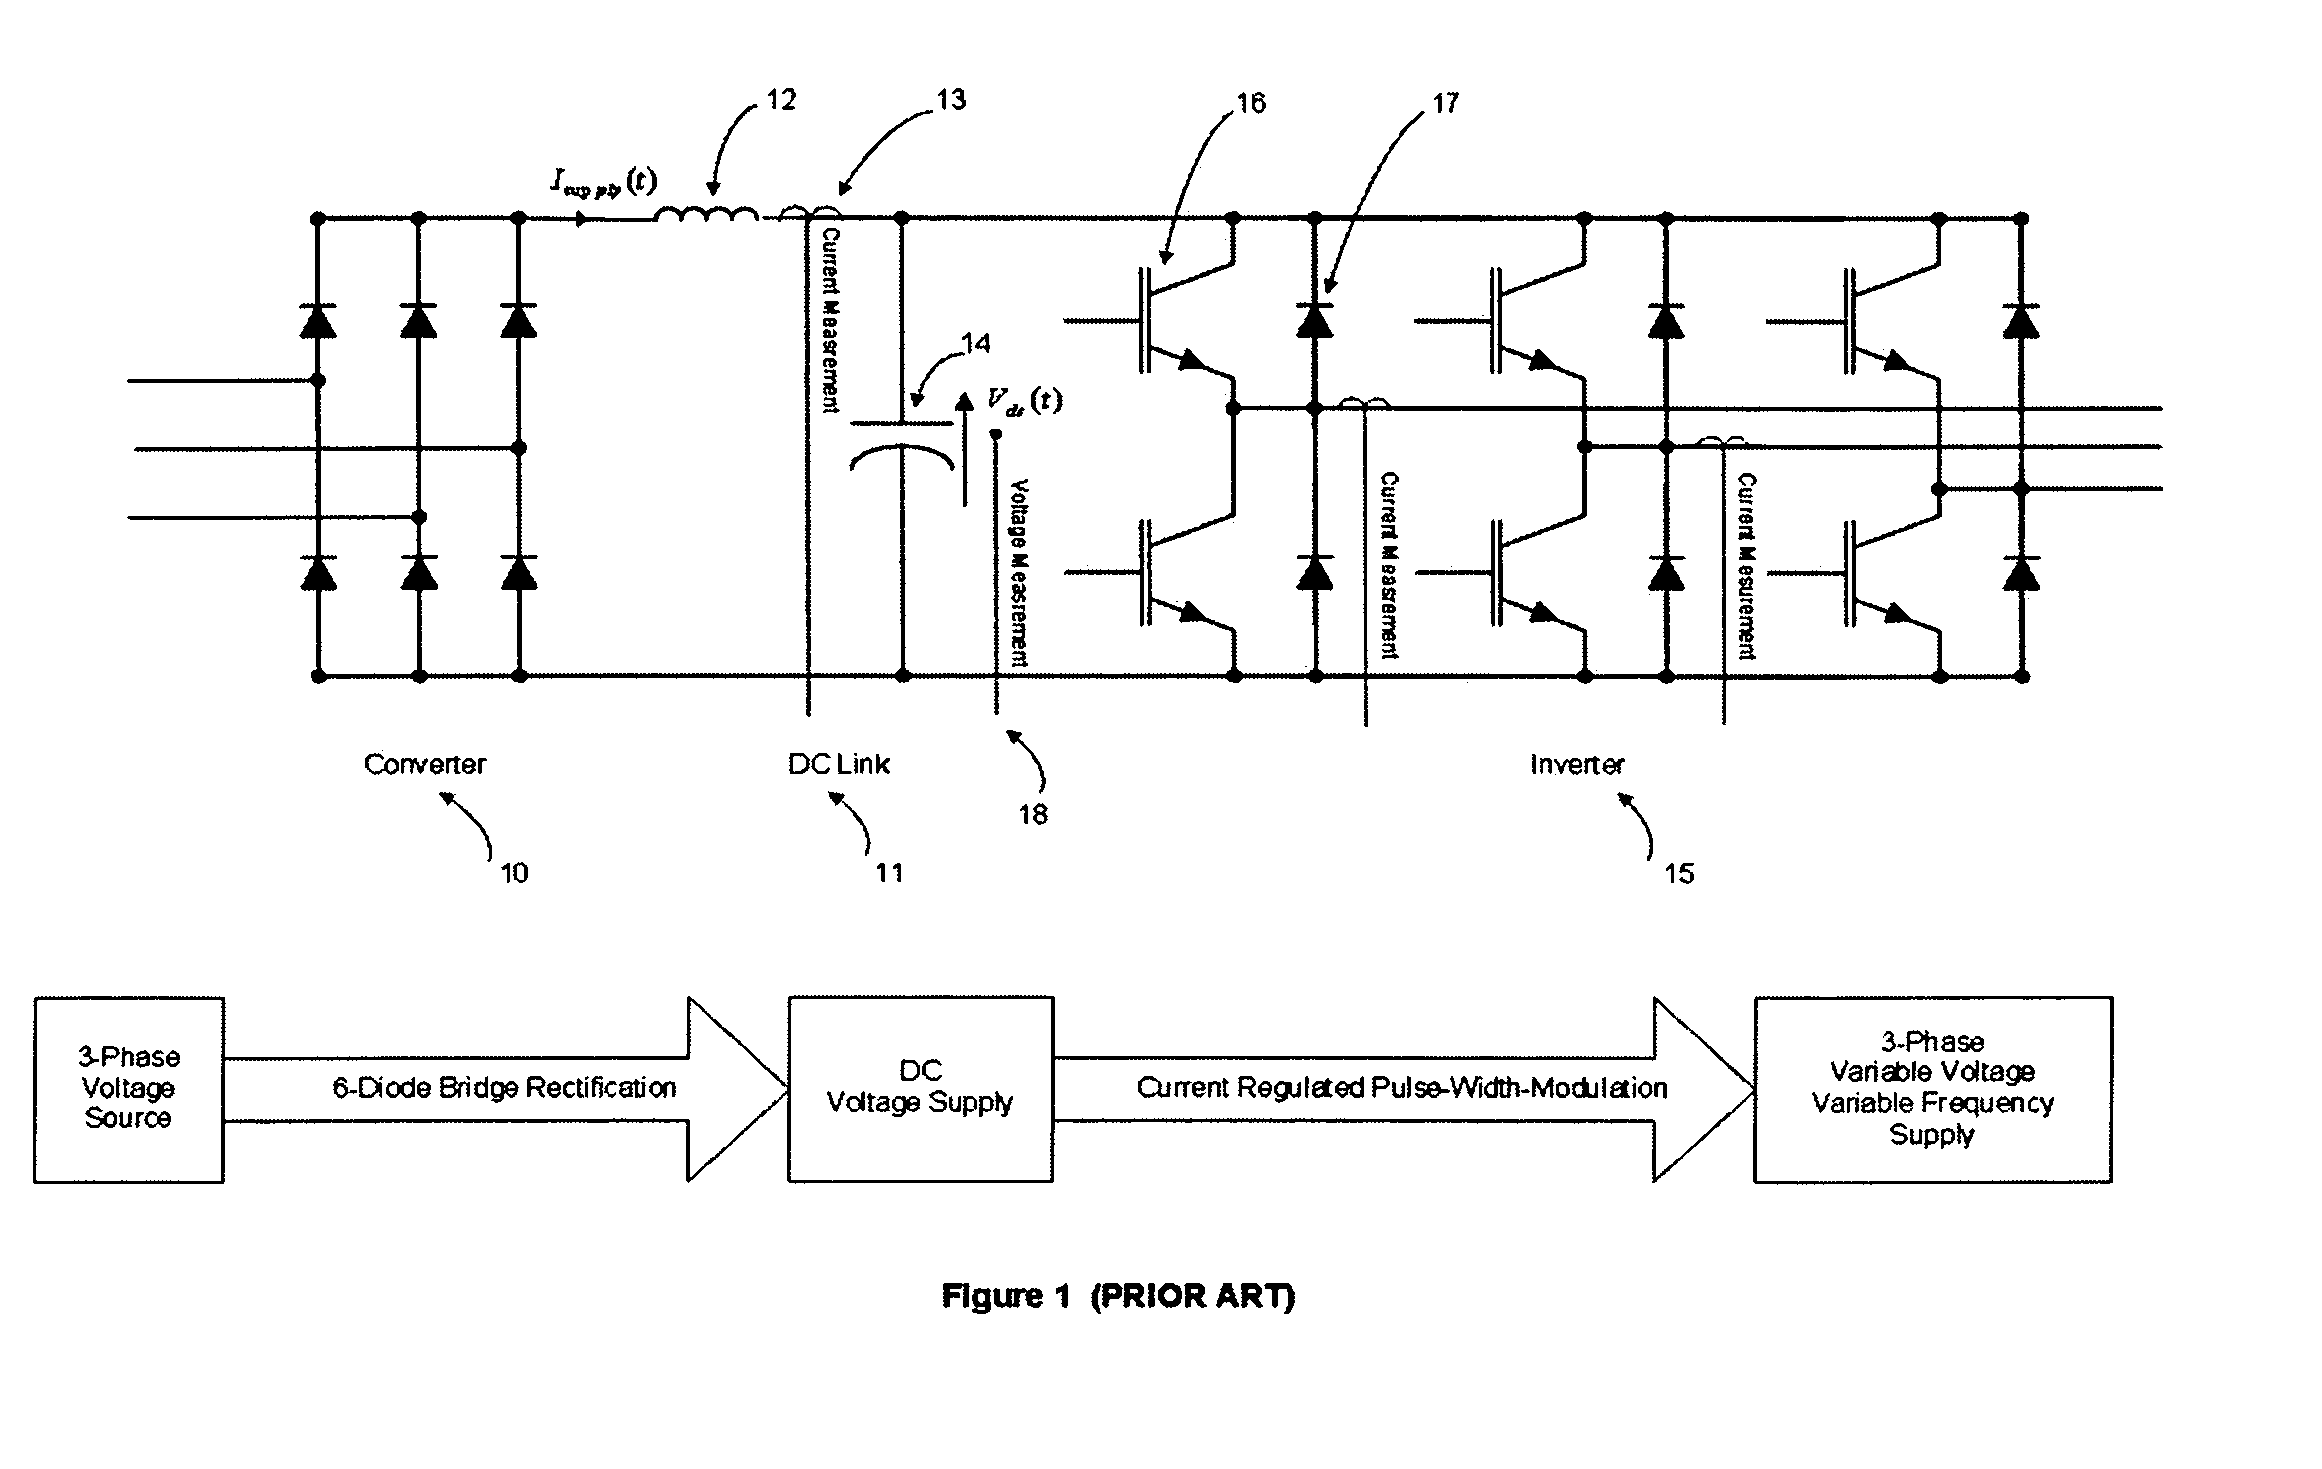 Energy management apparatus and method for injection molding systems